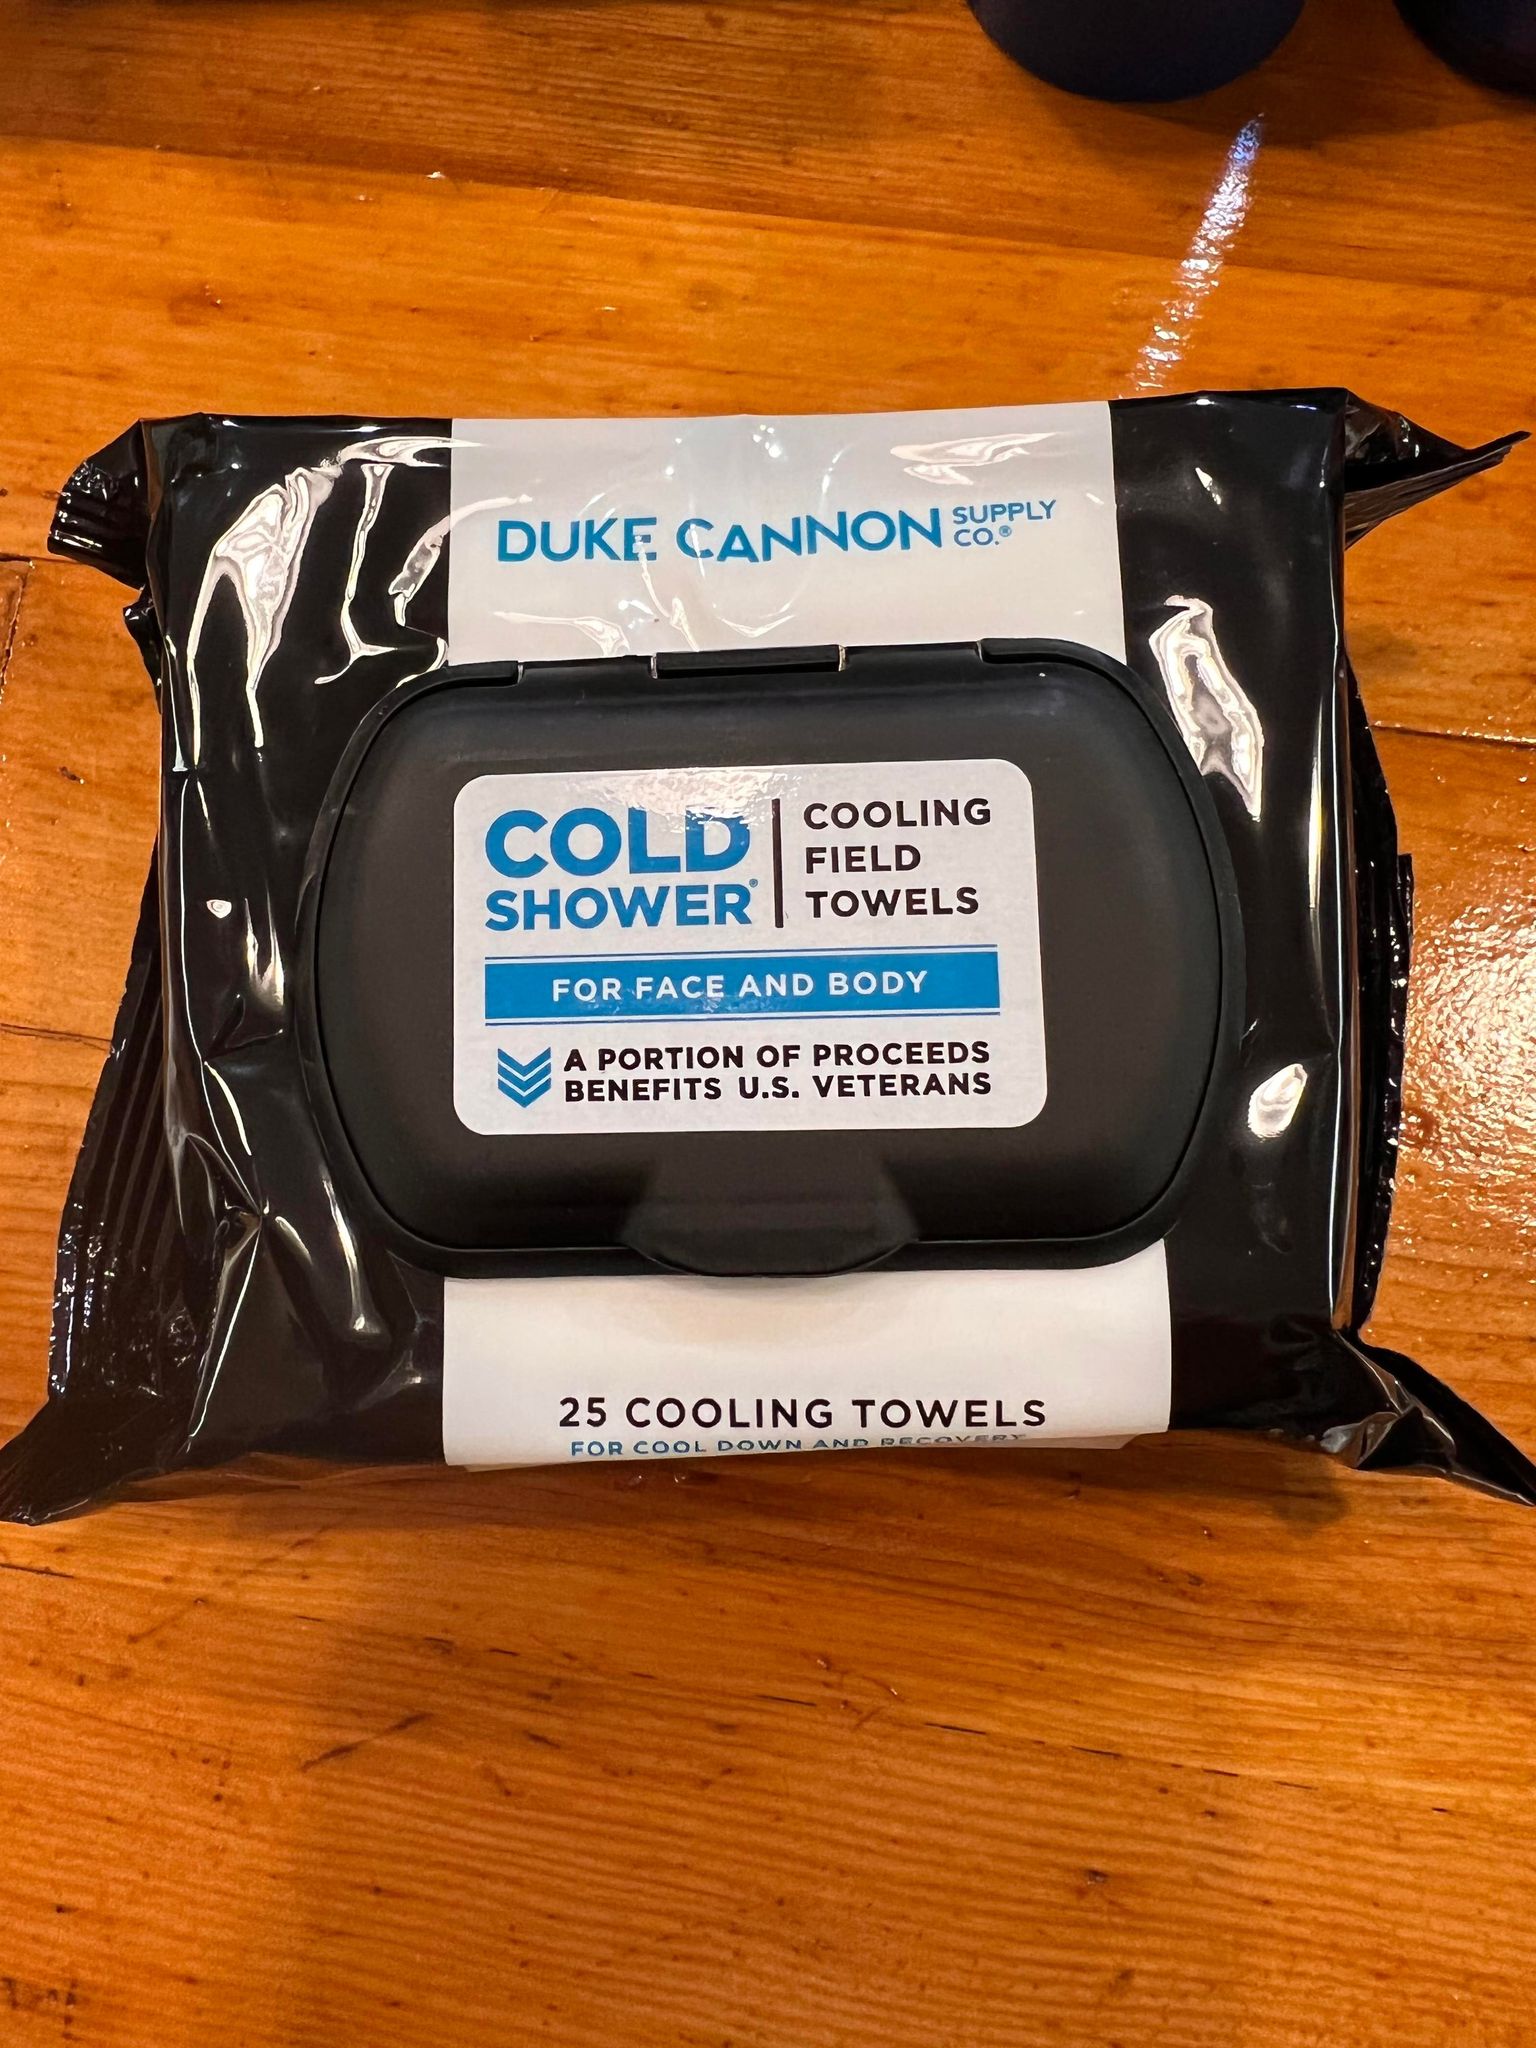 COLD SHOWER COOLING FIELD TOWELS BY DUKE CANNON